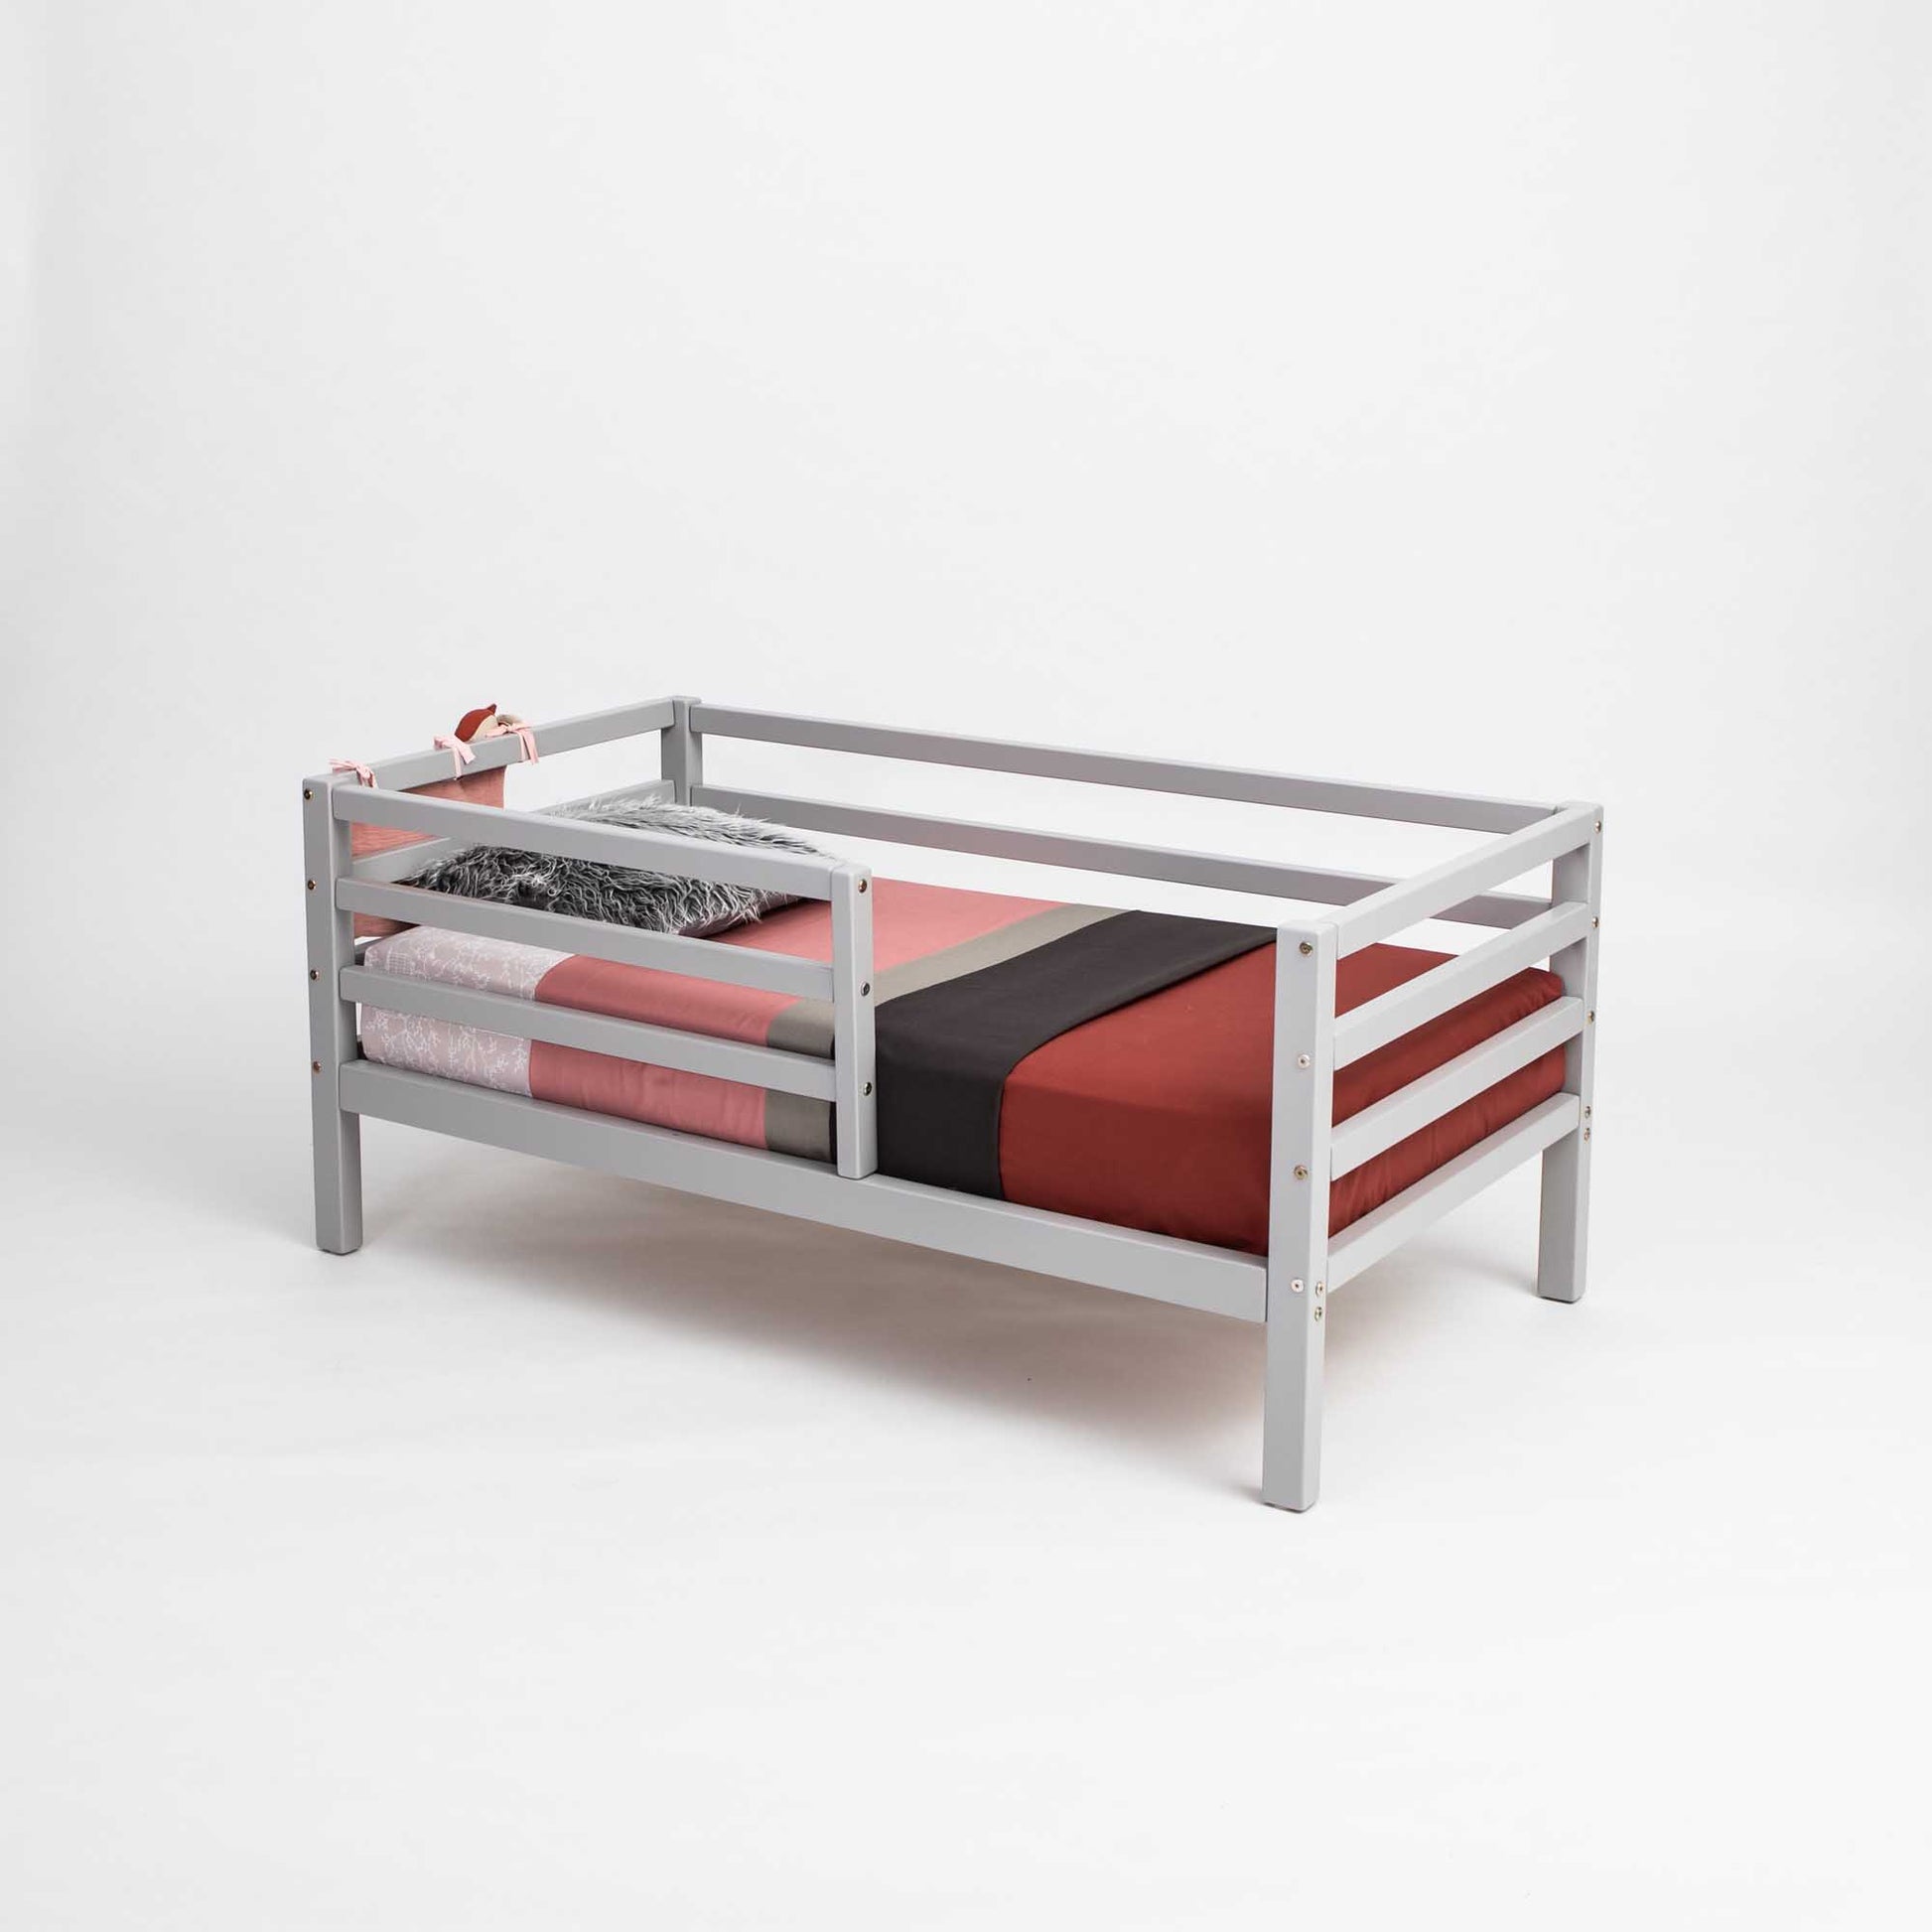 A Sweet Home From Wood 2-in-1 transformable kids' bed with a horizontal rail fence and a red and black sheet.